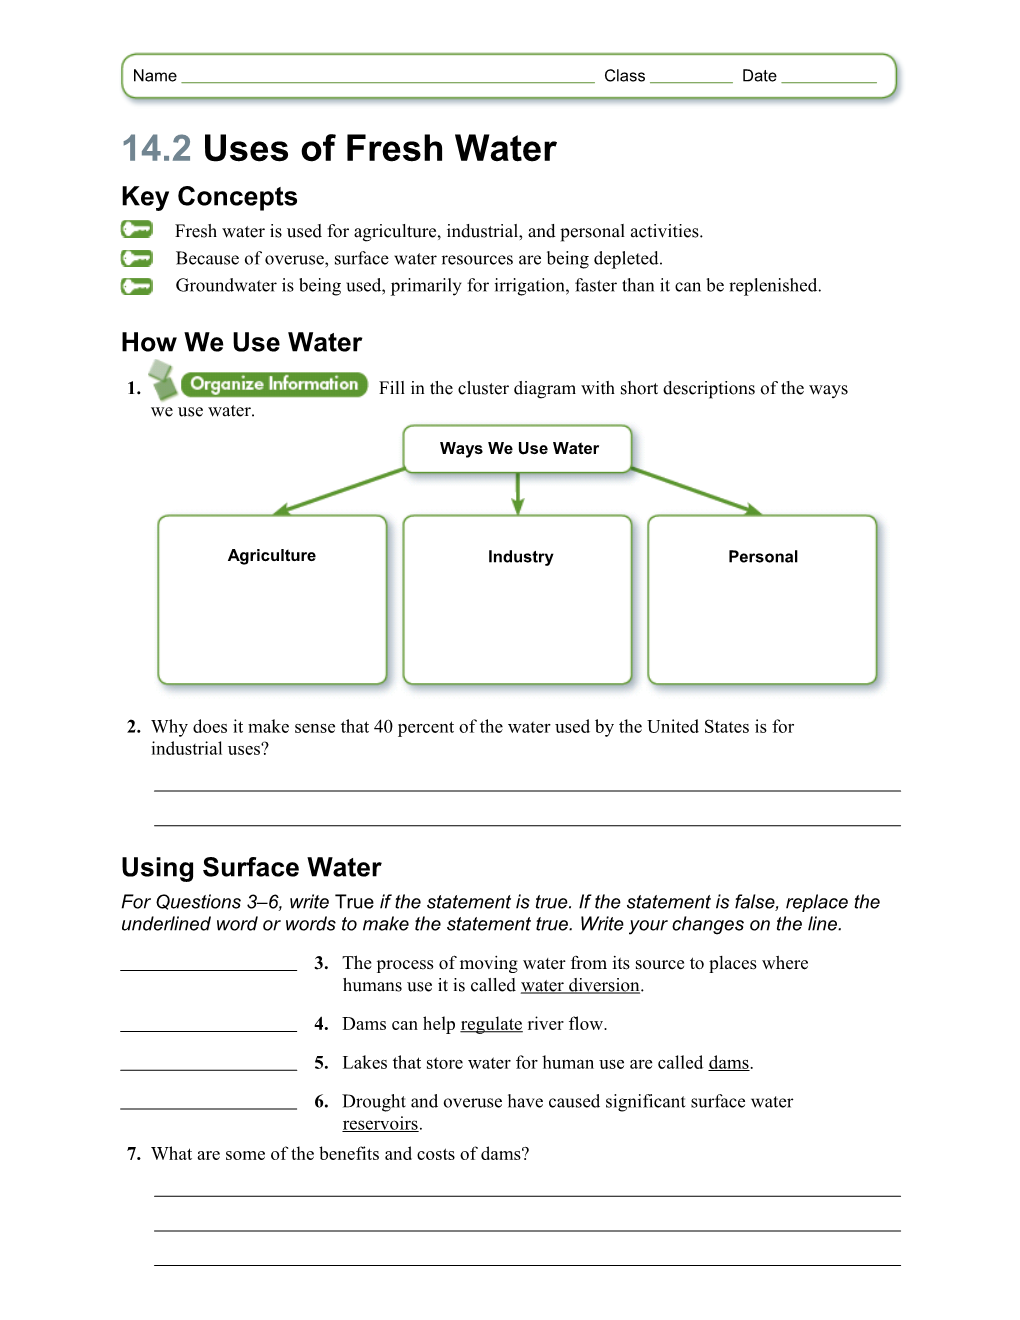 14.2Uses of Fresh Water